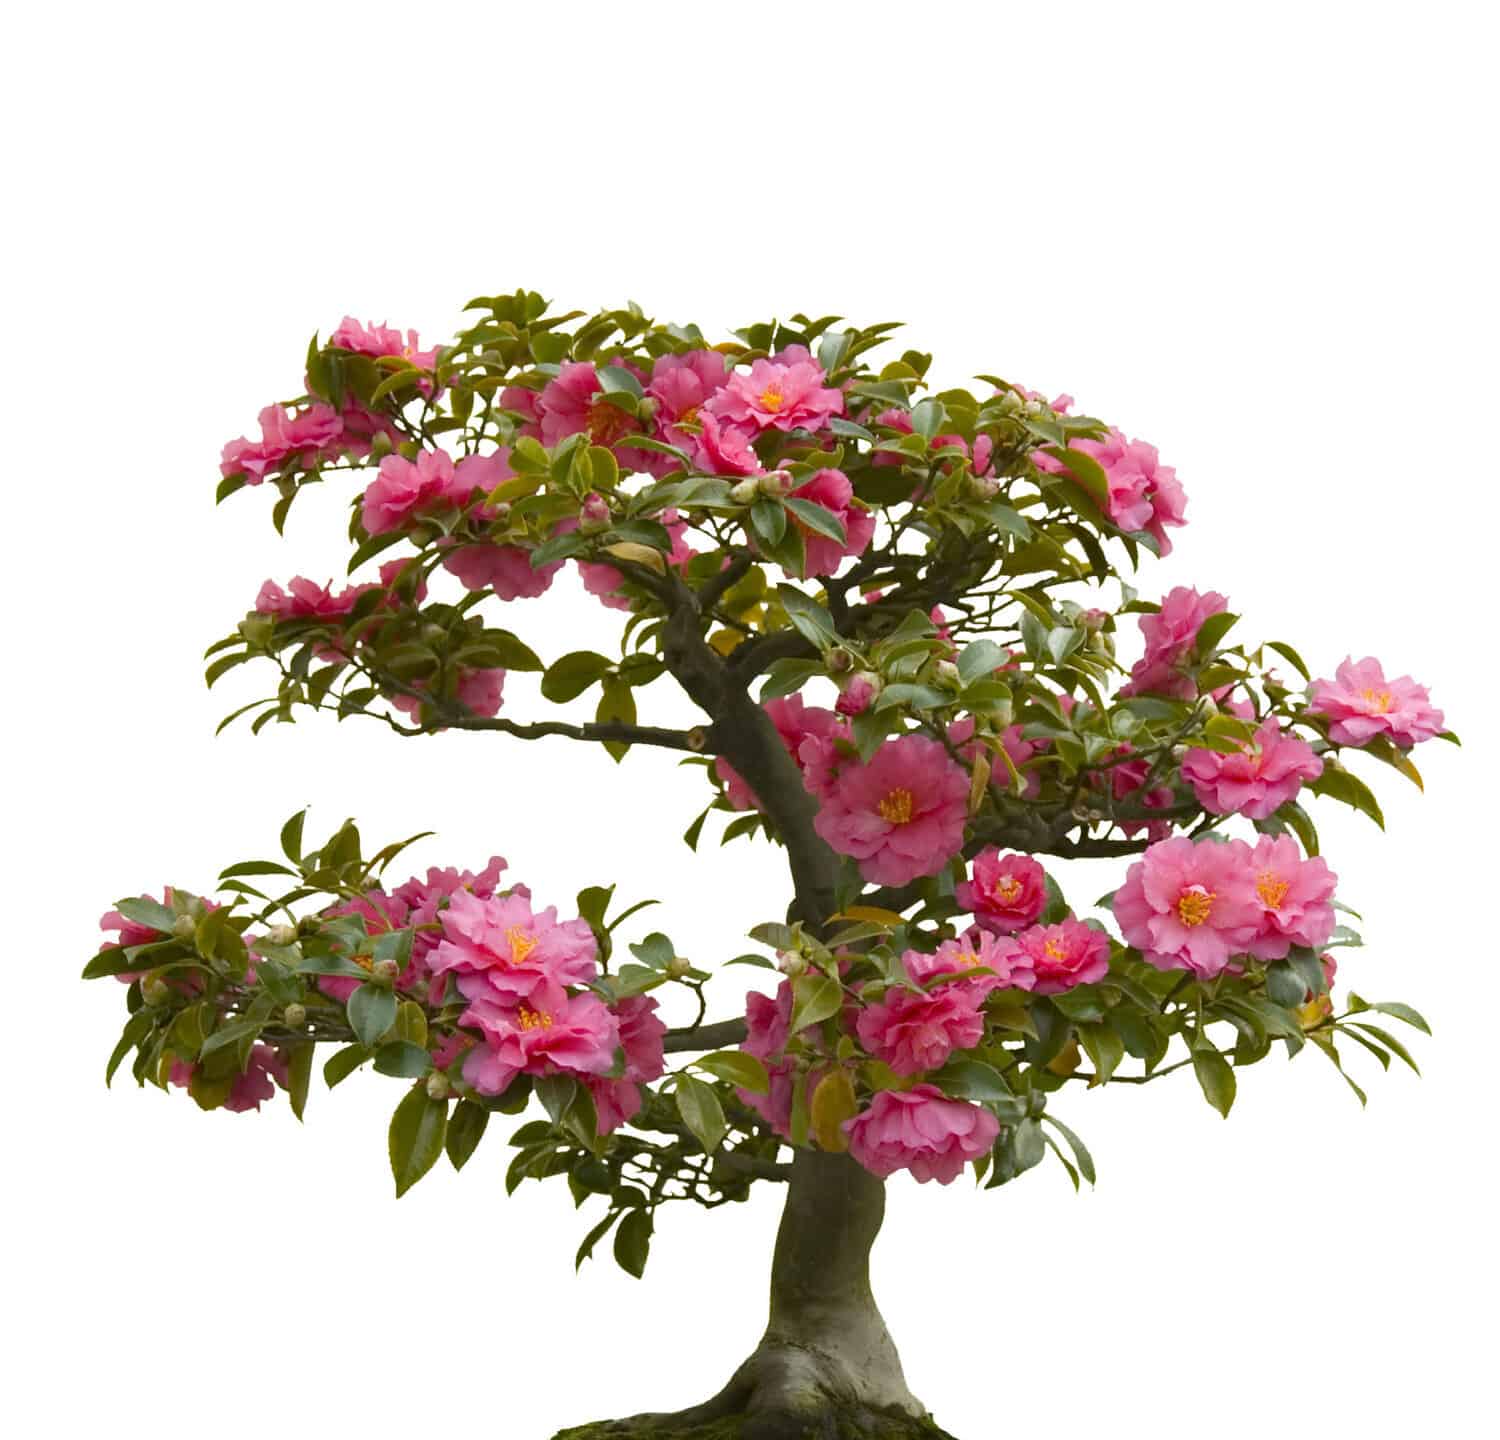 Camellia Bonsai Tree: Complete Care & Growing Instructions - Varieties ...